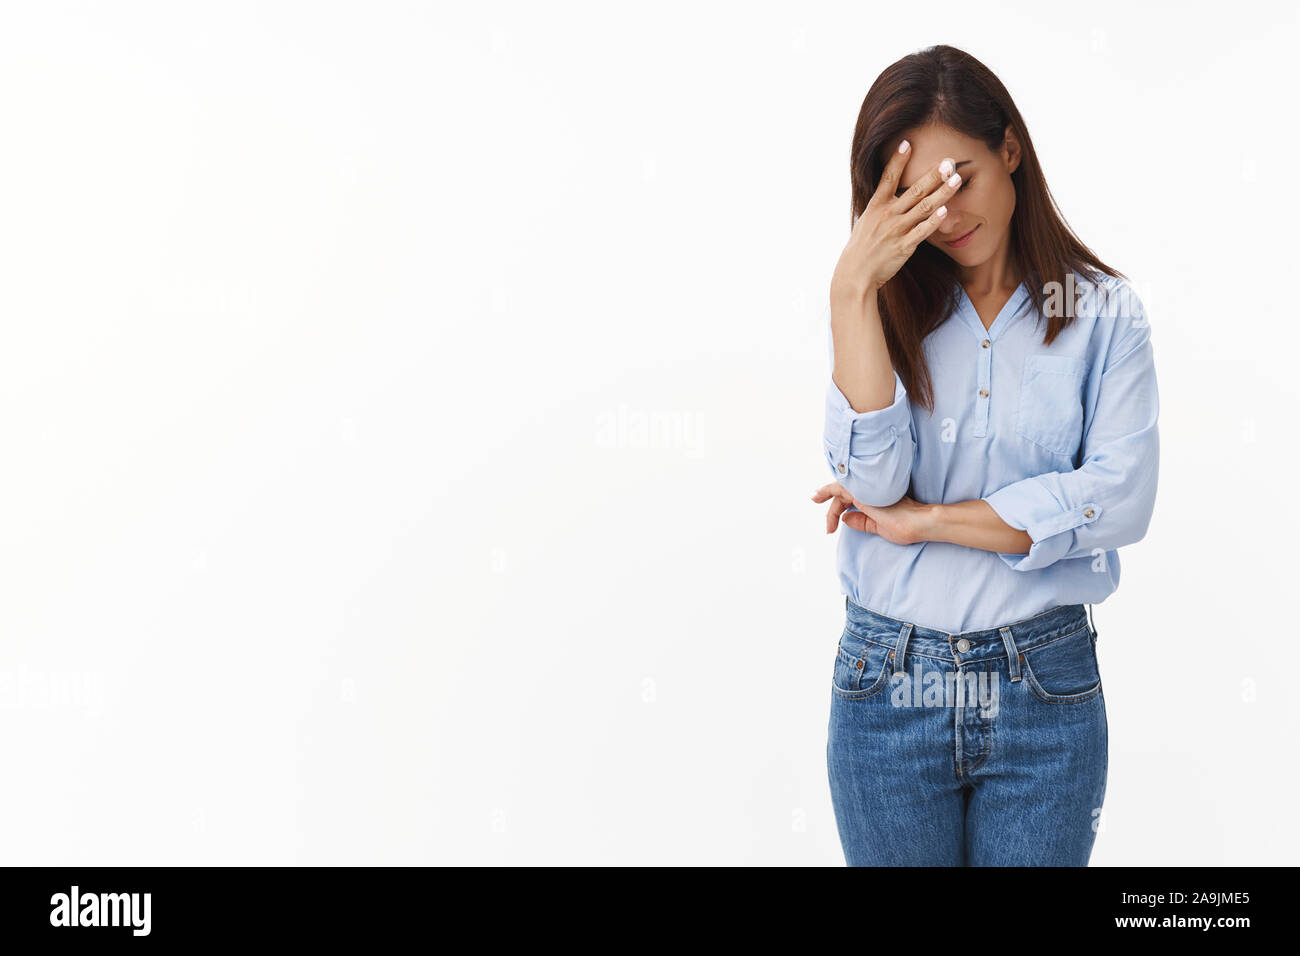 Middle Aged Woman Embarrassed Cut Out Stock Images And Pictures Alamy